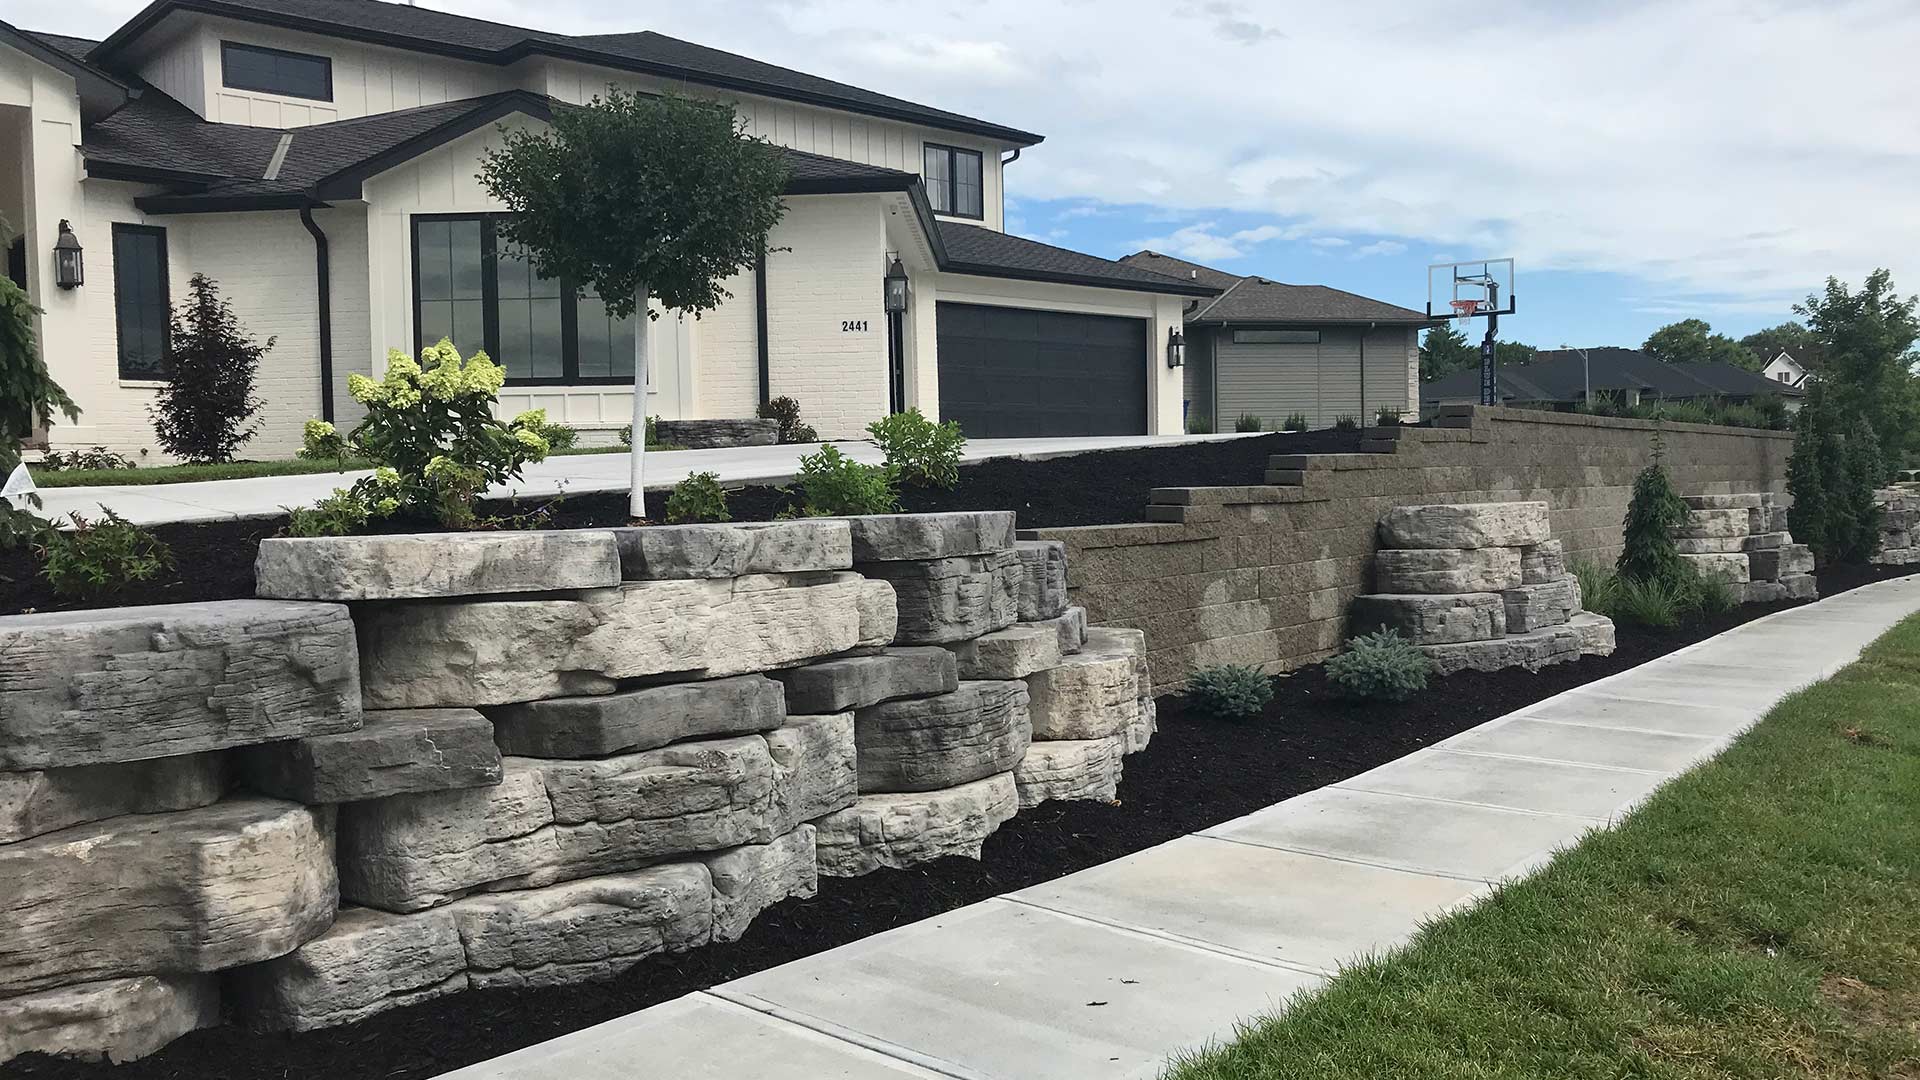 Unique retaining wall installed at a home in Omaha, NE.